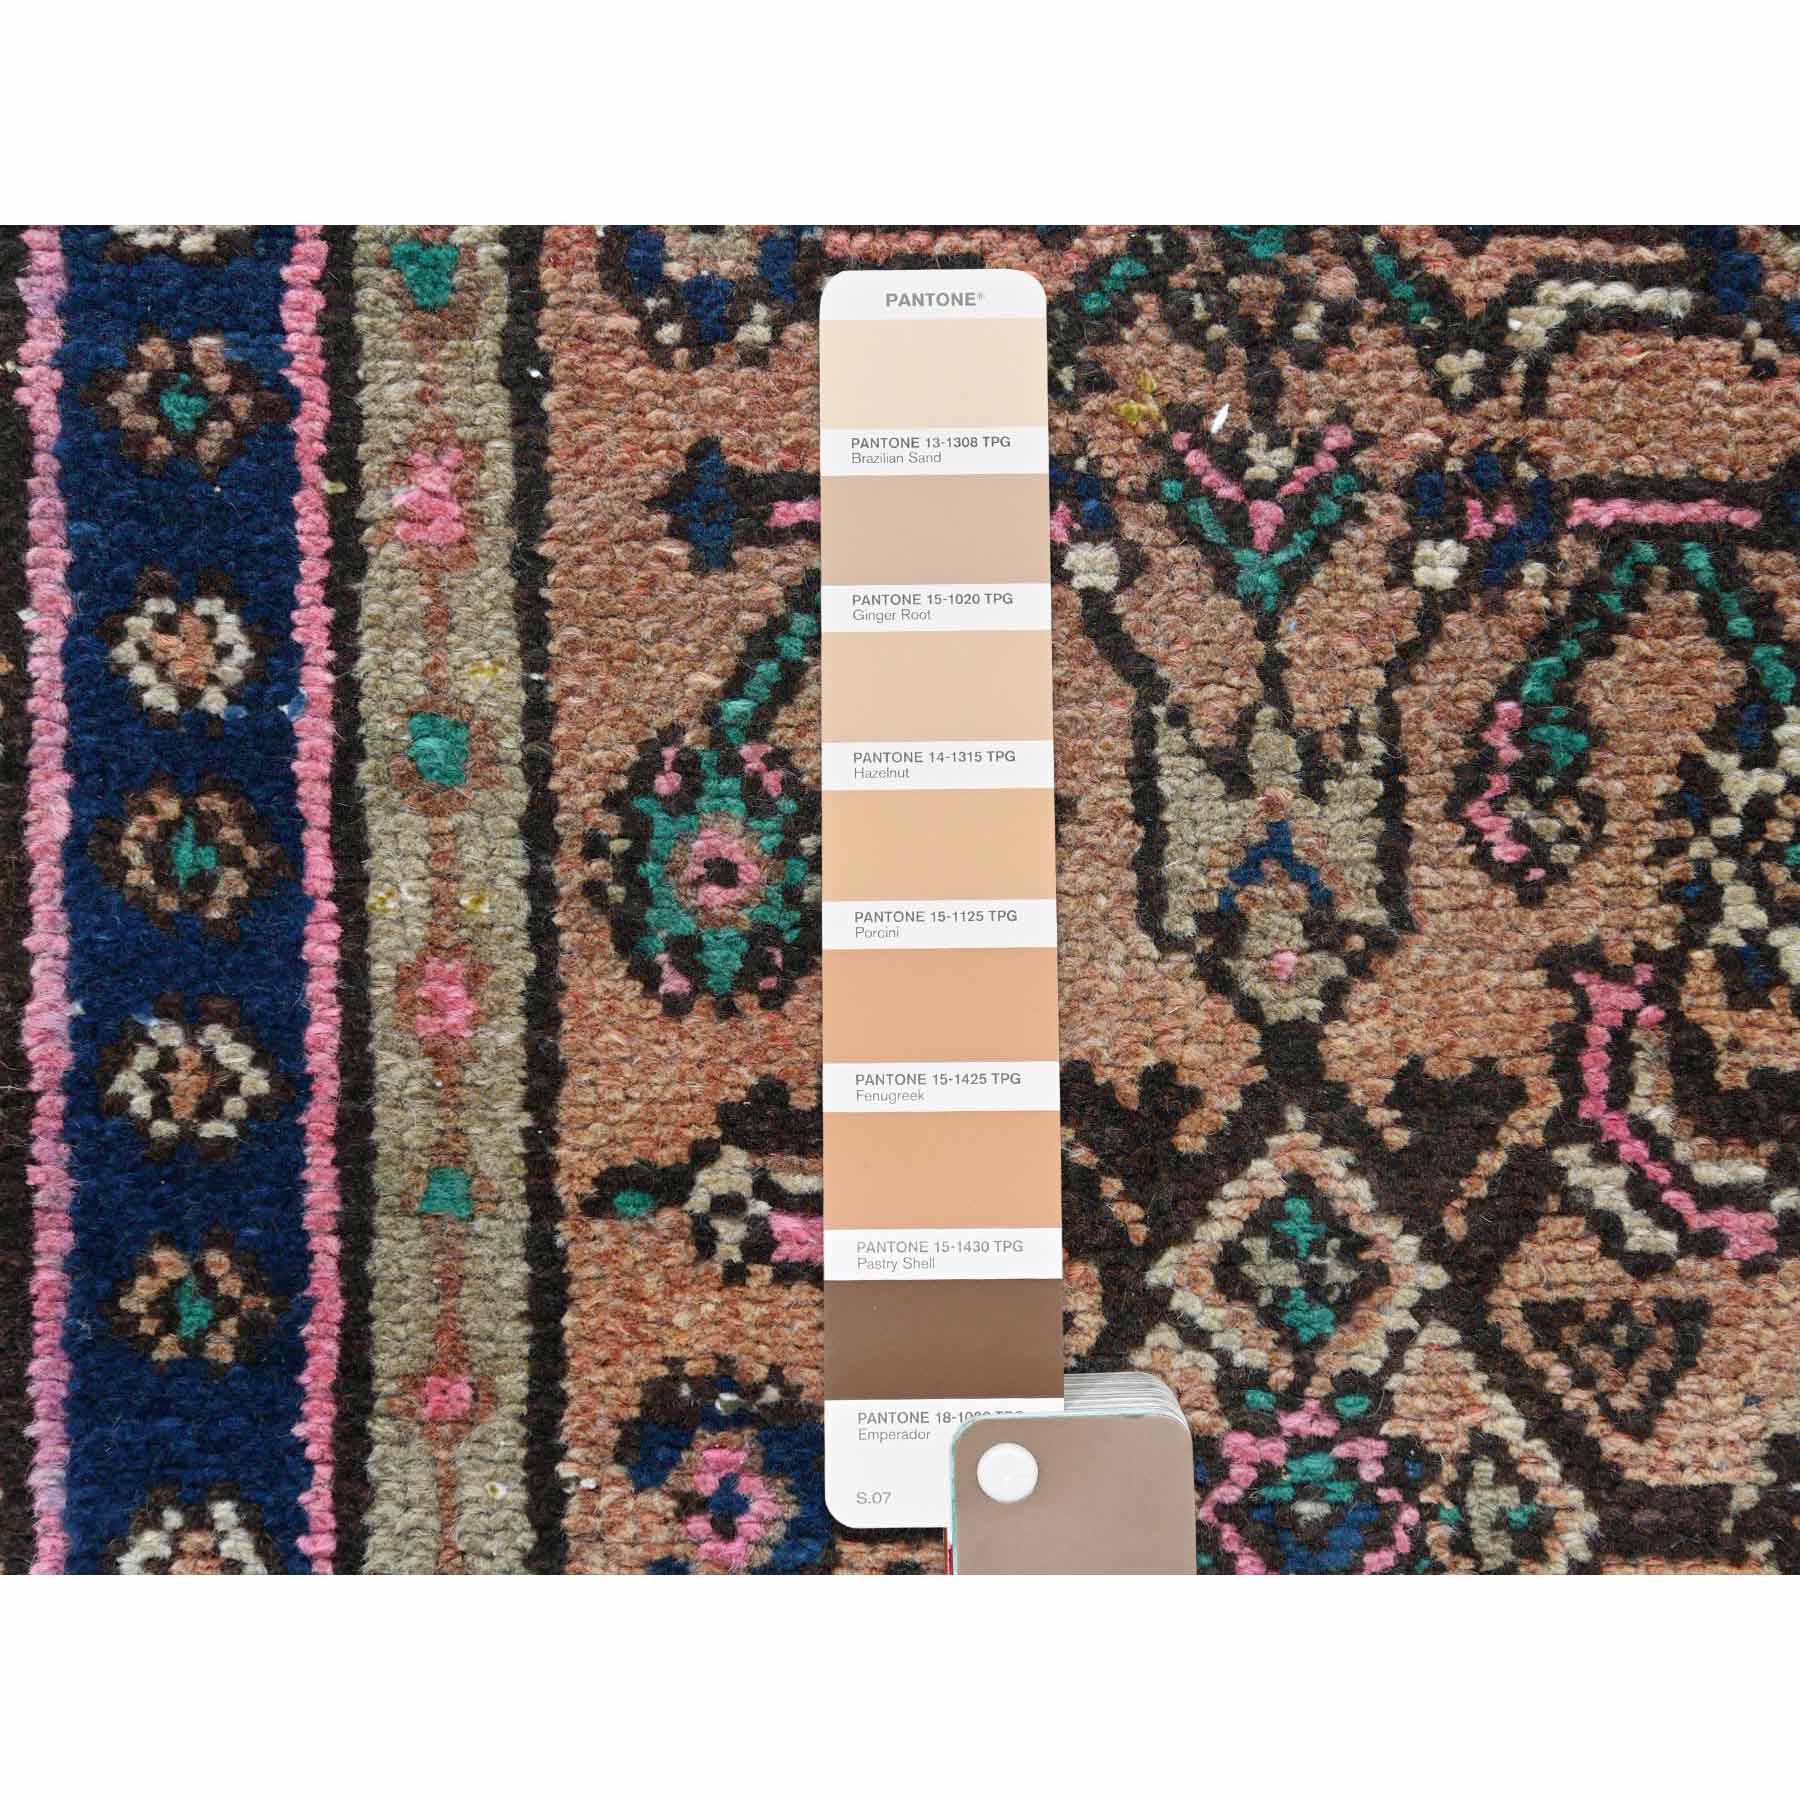 Overdyed-Vintage-Hand-Knotted-Rug-405975